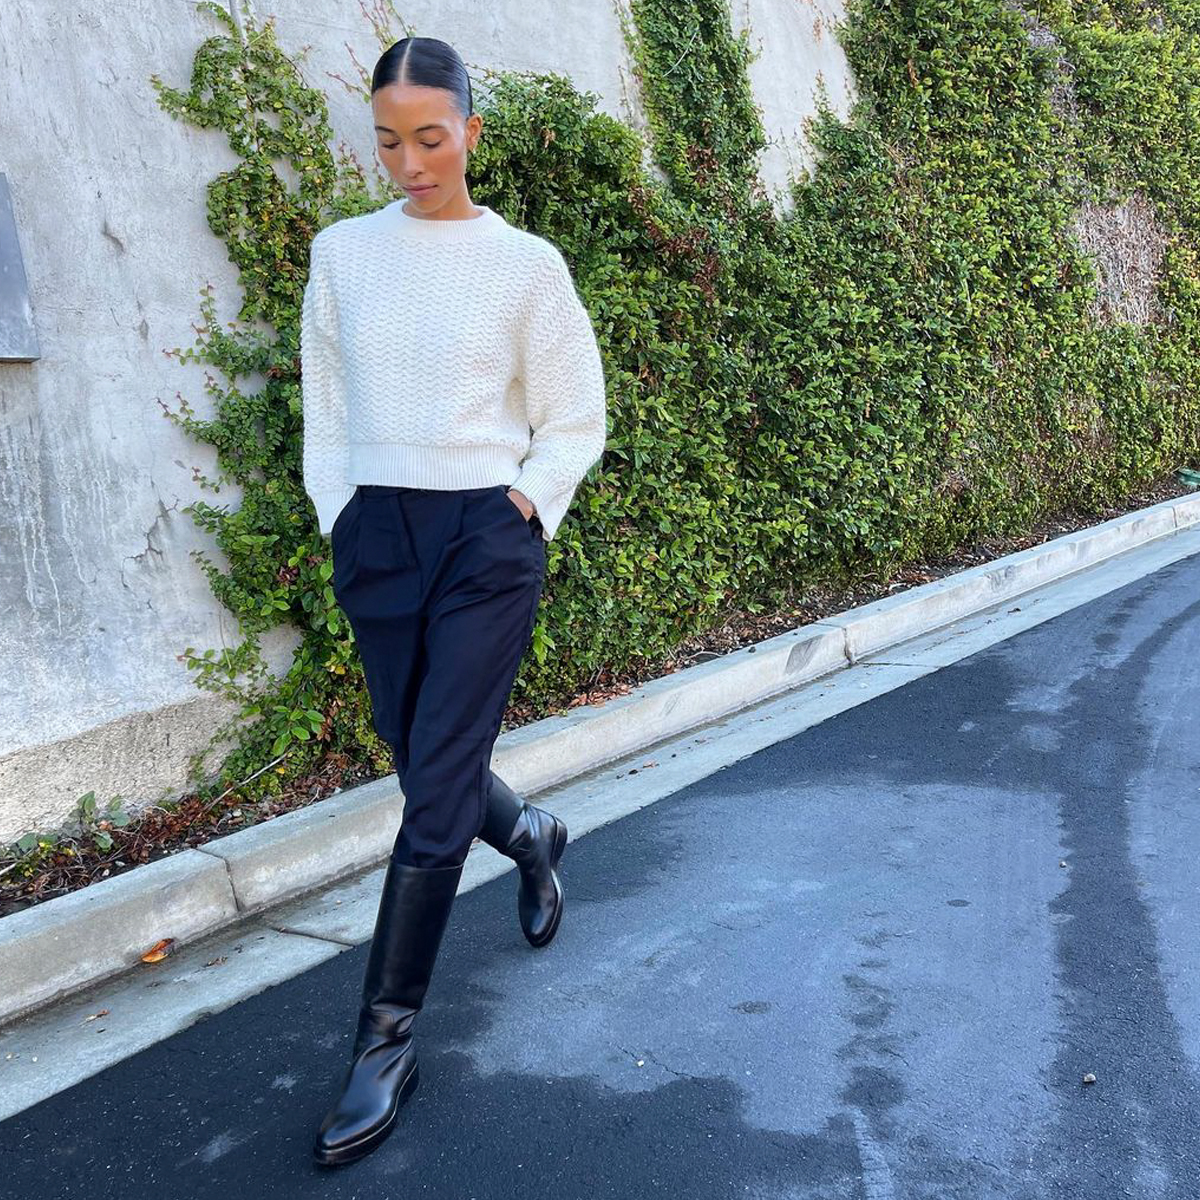 How to wear cropped trousers through the winter, trousers, winter, fashion, That's right, you can wear your cropped trousers through winter - let  fashion director Arabella show you how